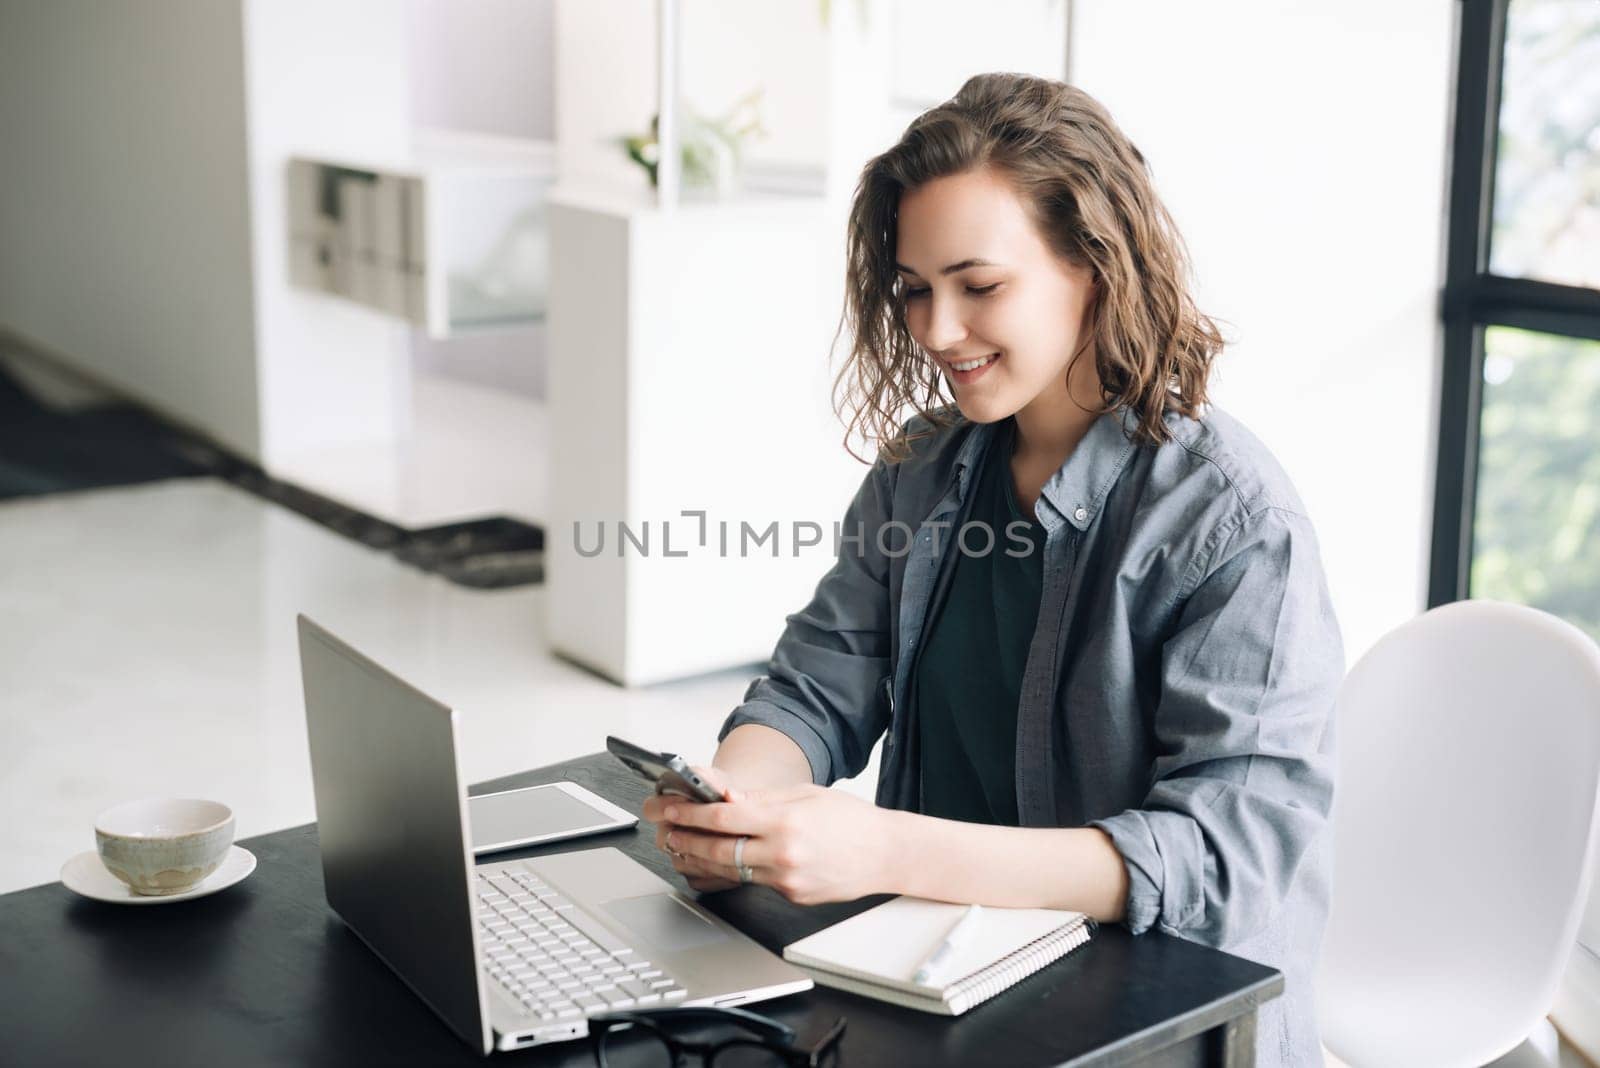 Young Woman Embracing the Modern Work Environment: Using Laptop Computer and Mobile Phone at Office. Student Girl Engaged in Productive Work from Home. Freelancing, Business, E-Learning